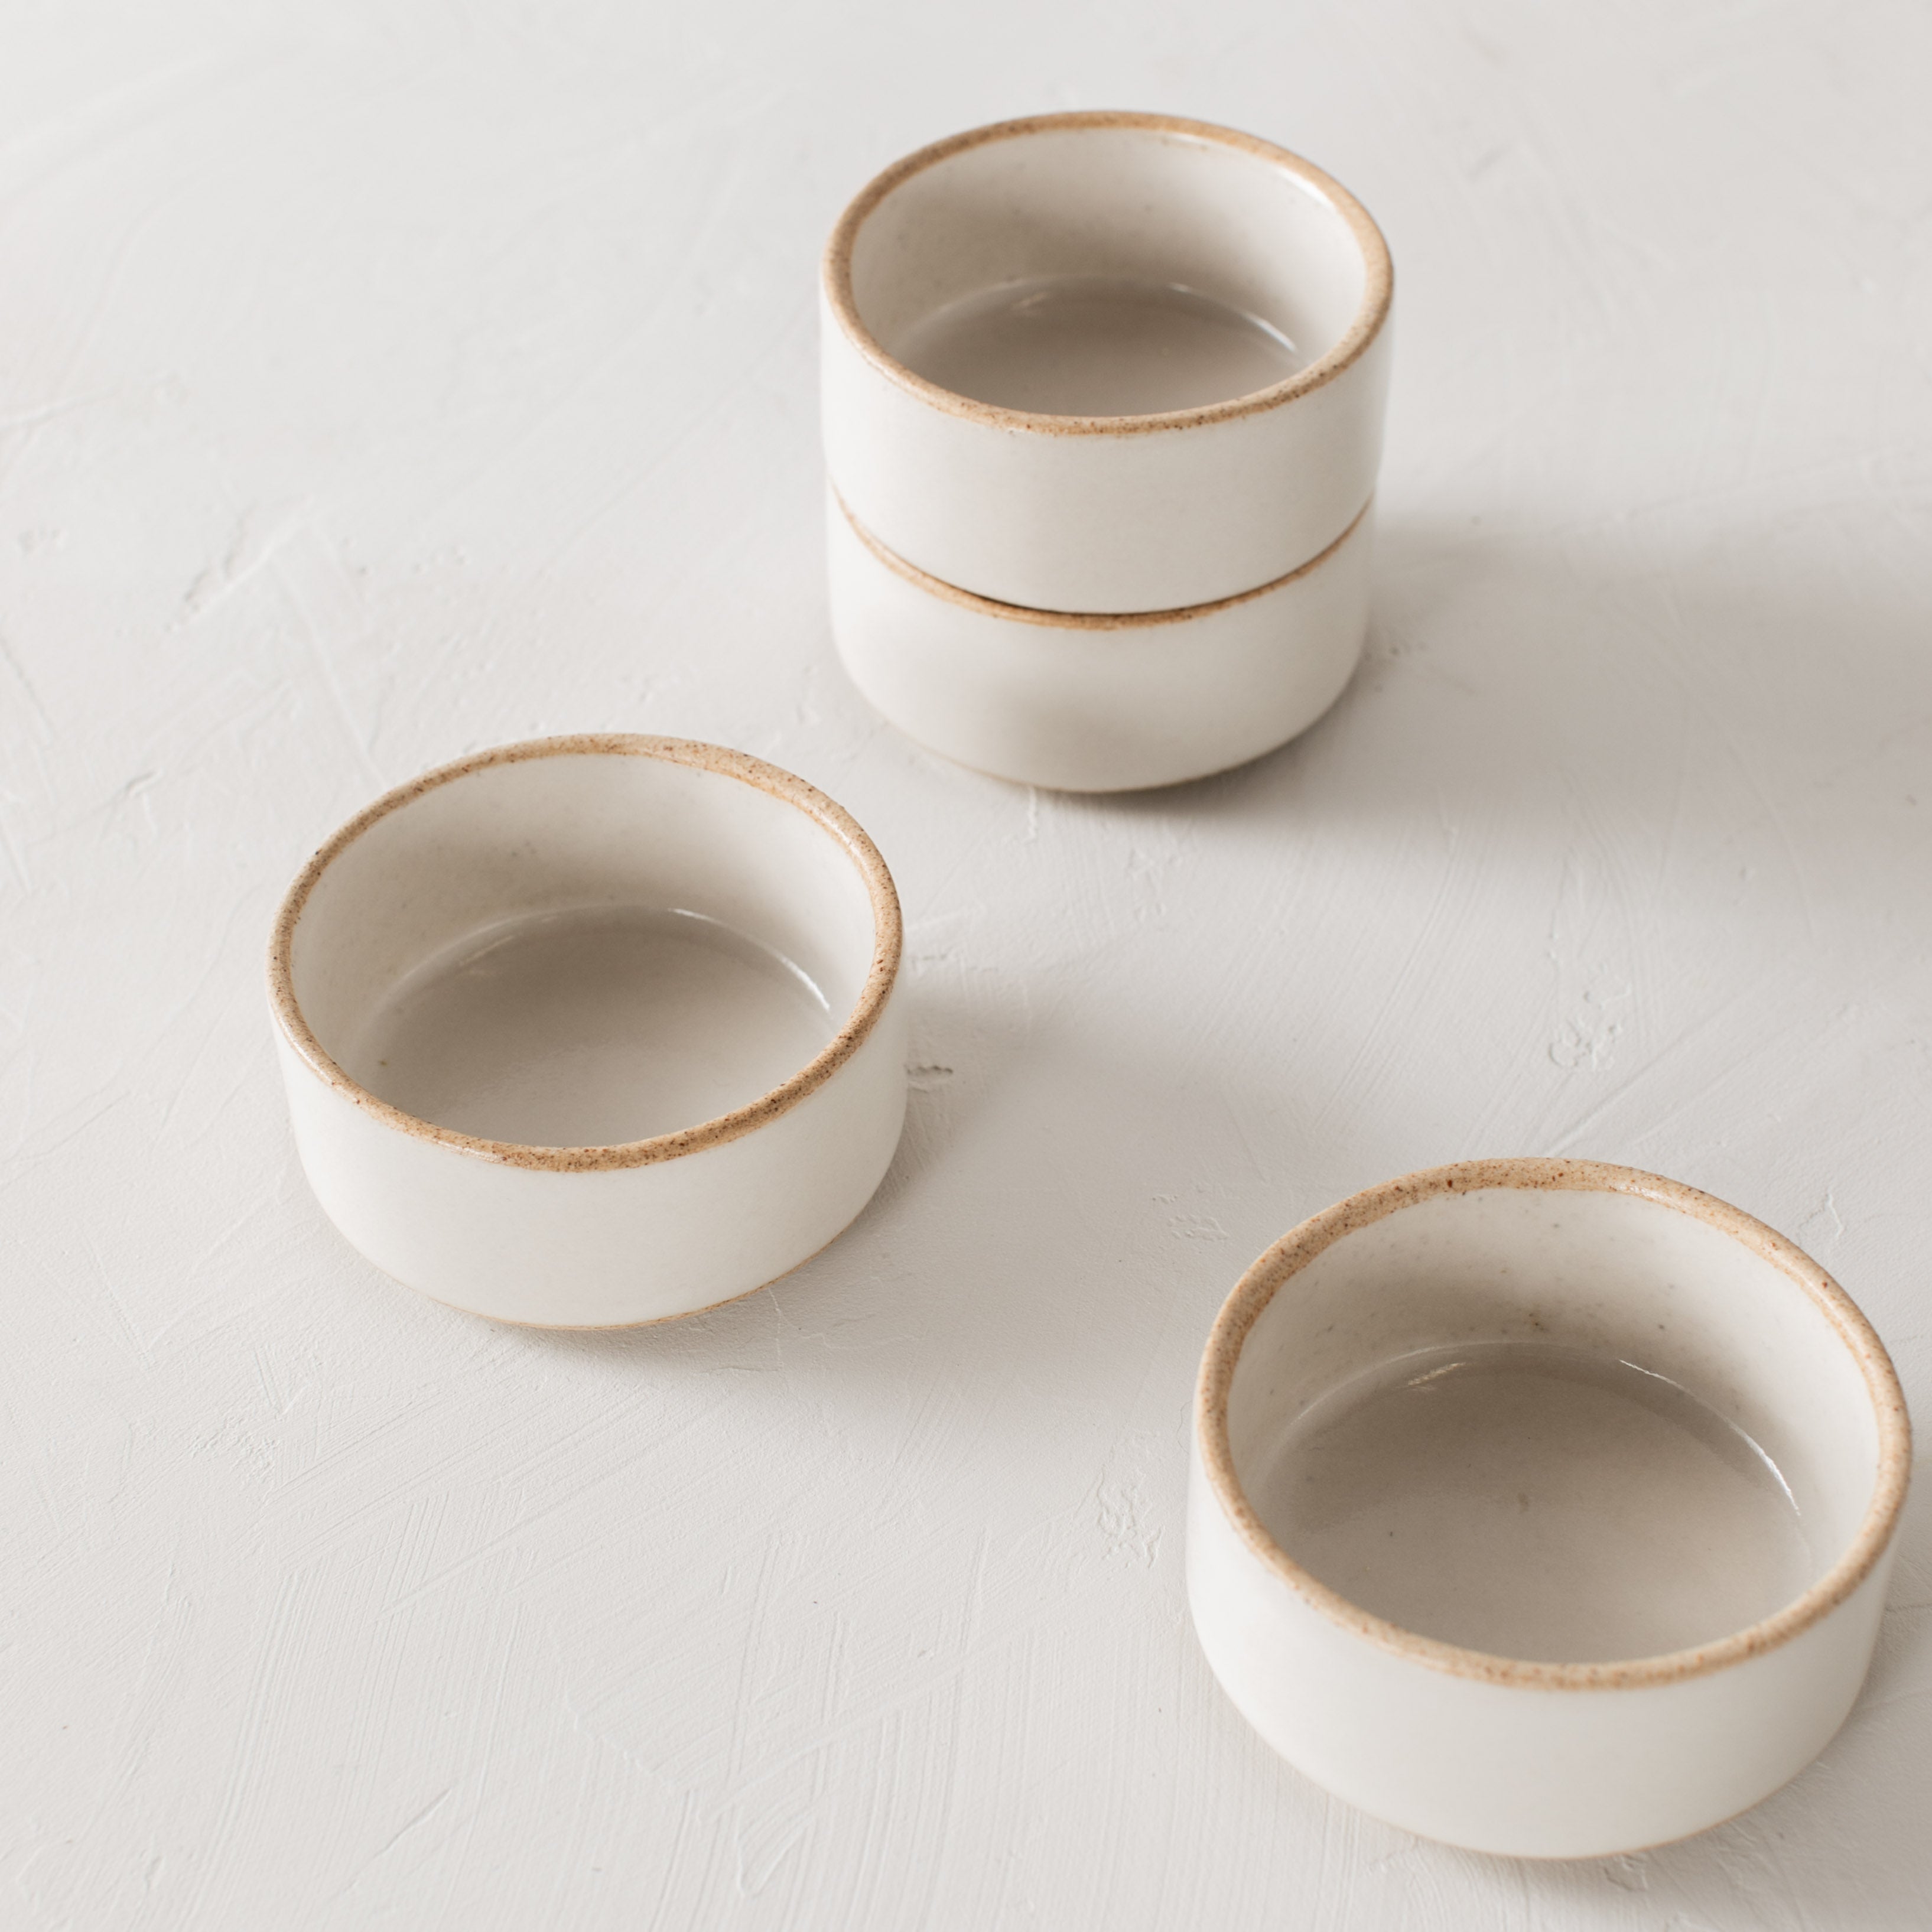 Four ceramic dishes staged on a white tabletop. Two stacked with the other two laid near. Ramekins have an exposed stoneware rim and base. Handmade ceramic ramekin dishes, designed and sold by Convivial Production, Kansas City ceramics.